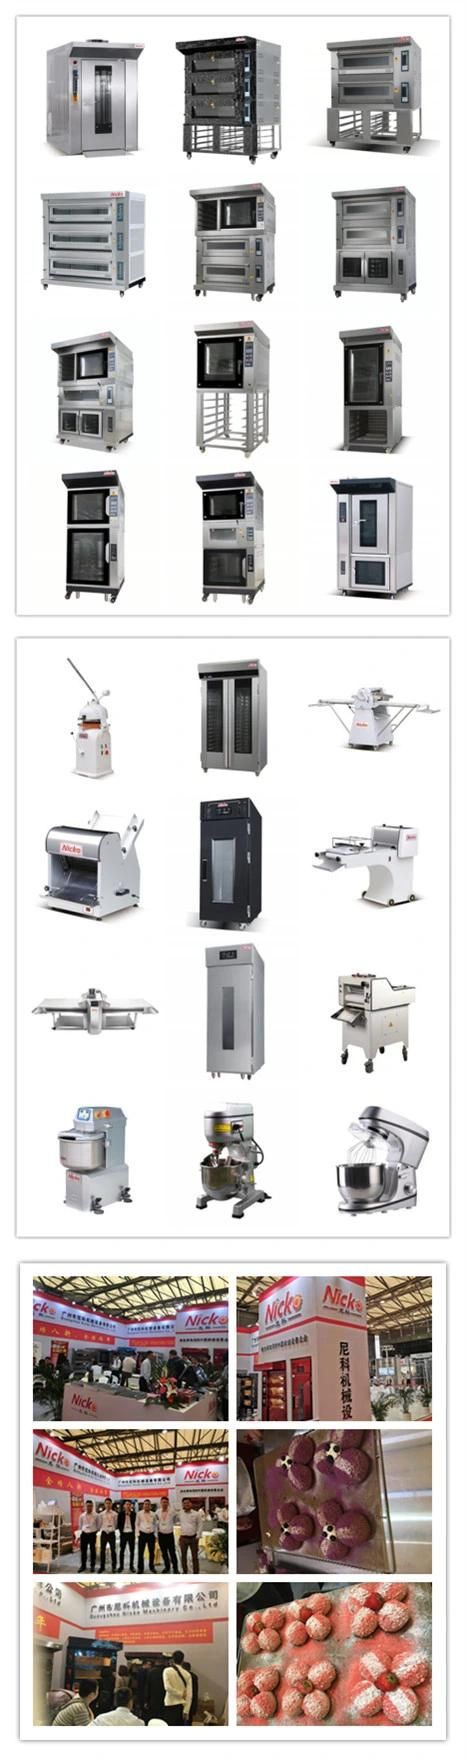 Cake Machines Commercial Bakery Equipment Pizza Oven Baking Oven